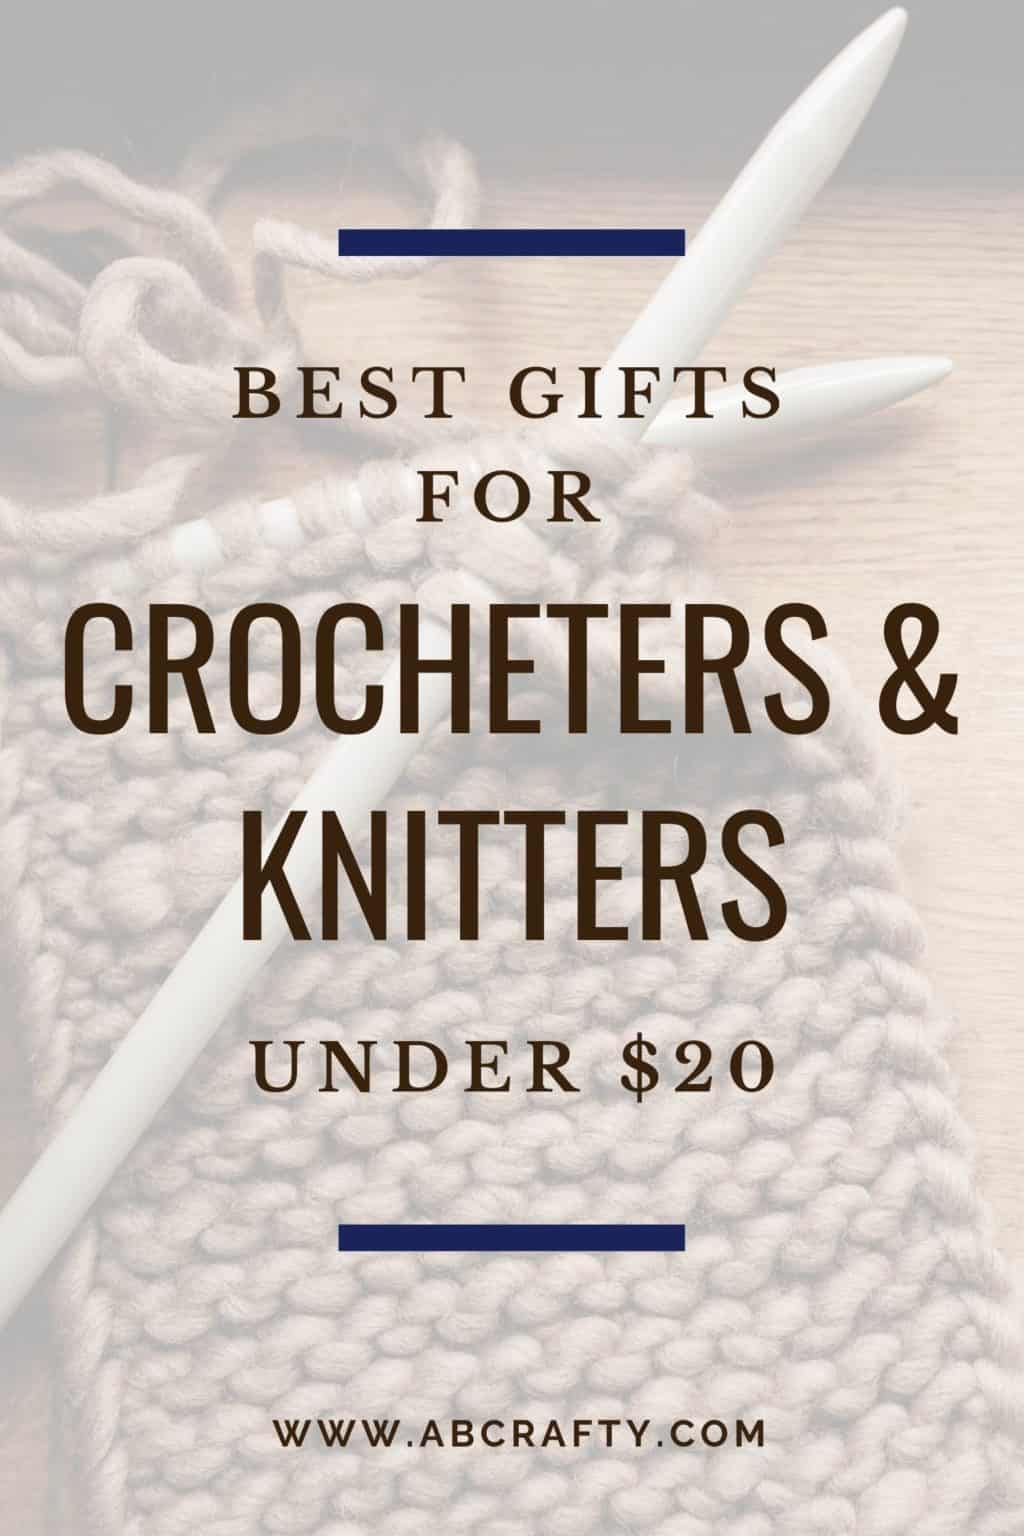 knit item with knitting needles with the title "best gifts crocheters and knitters under $20 by abcrafty.com"